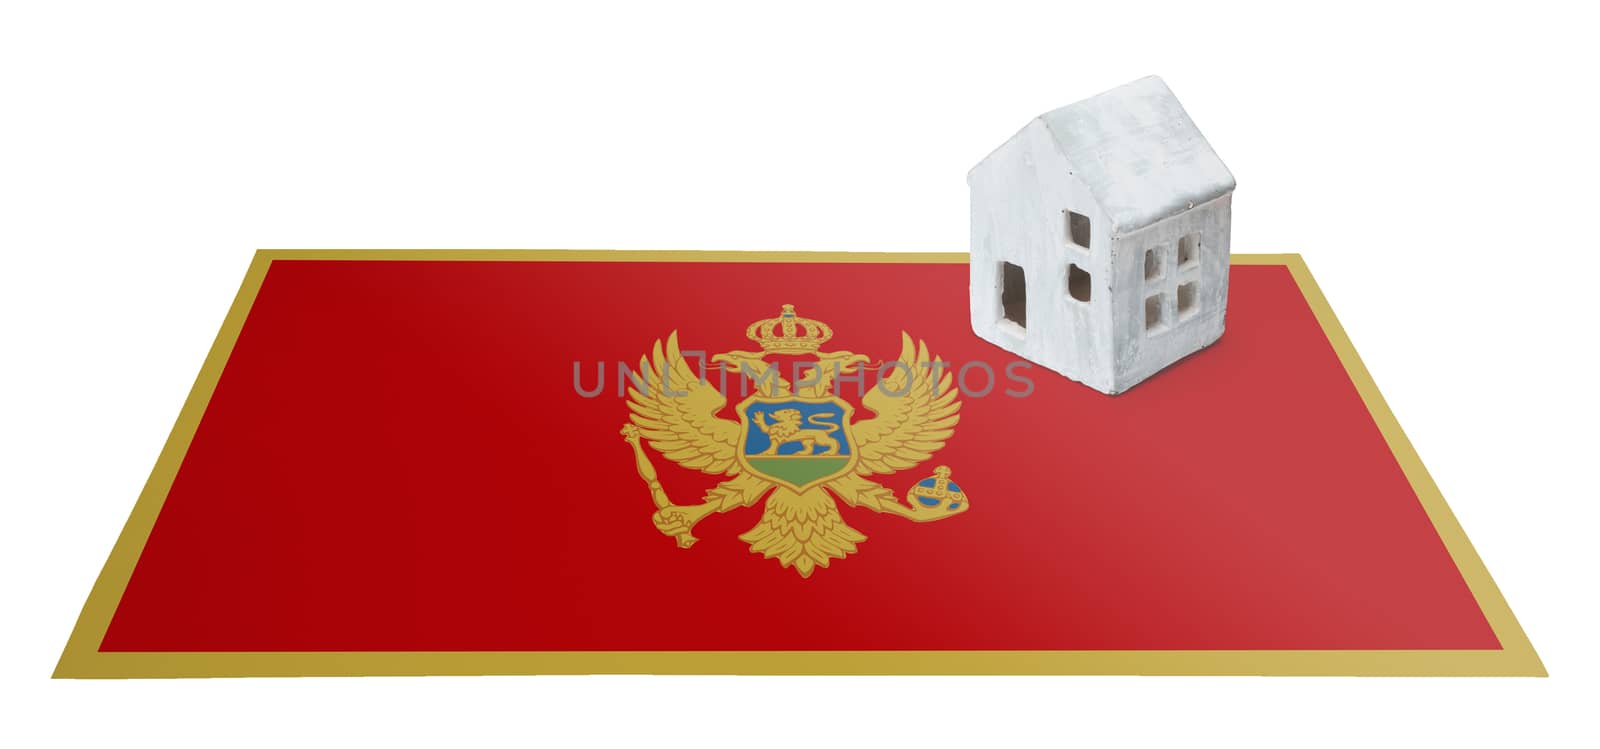 Small house on a flag - Living or migrating to Montenegro